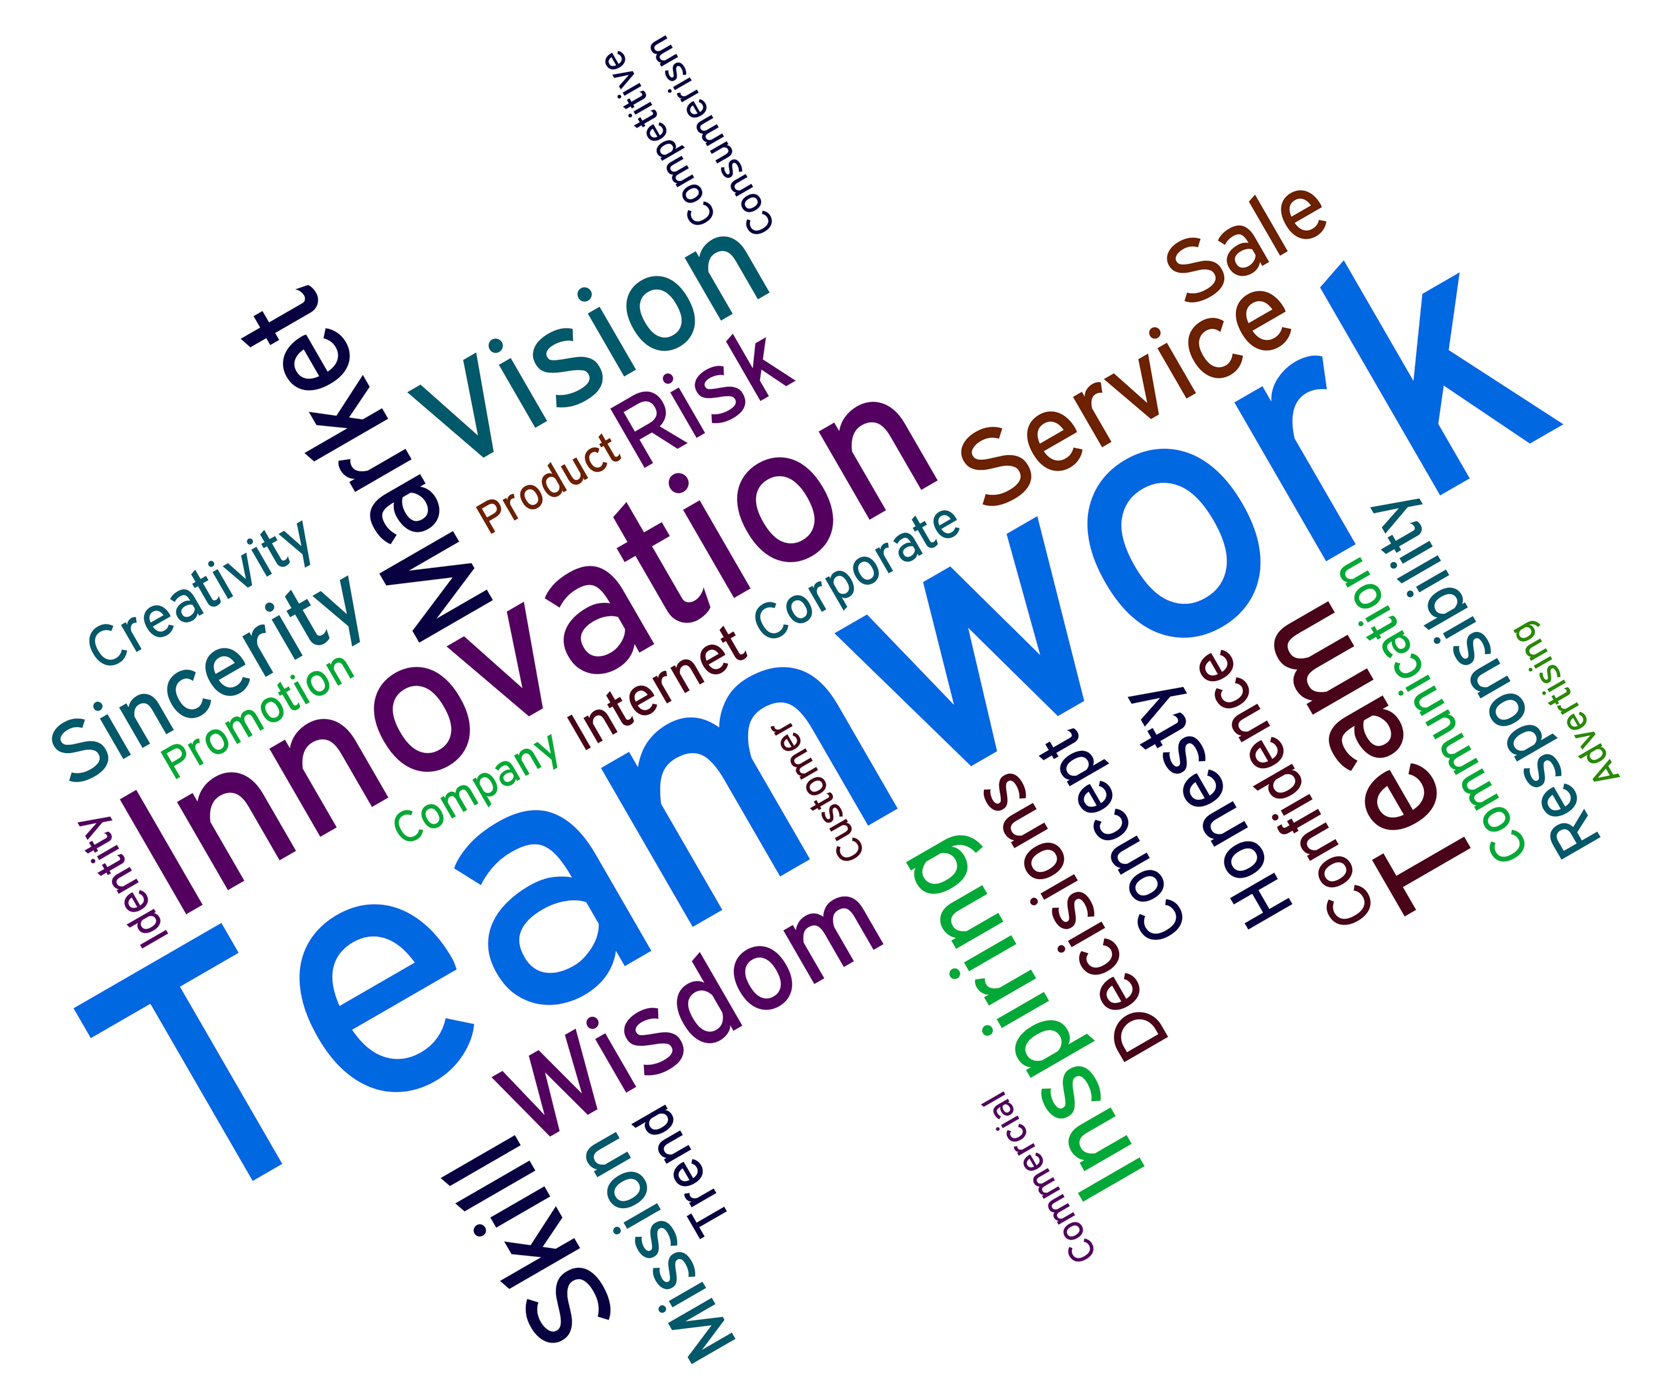 Teamwork words shows text organized and networking photo